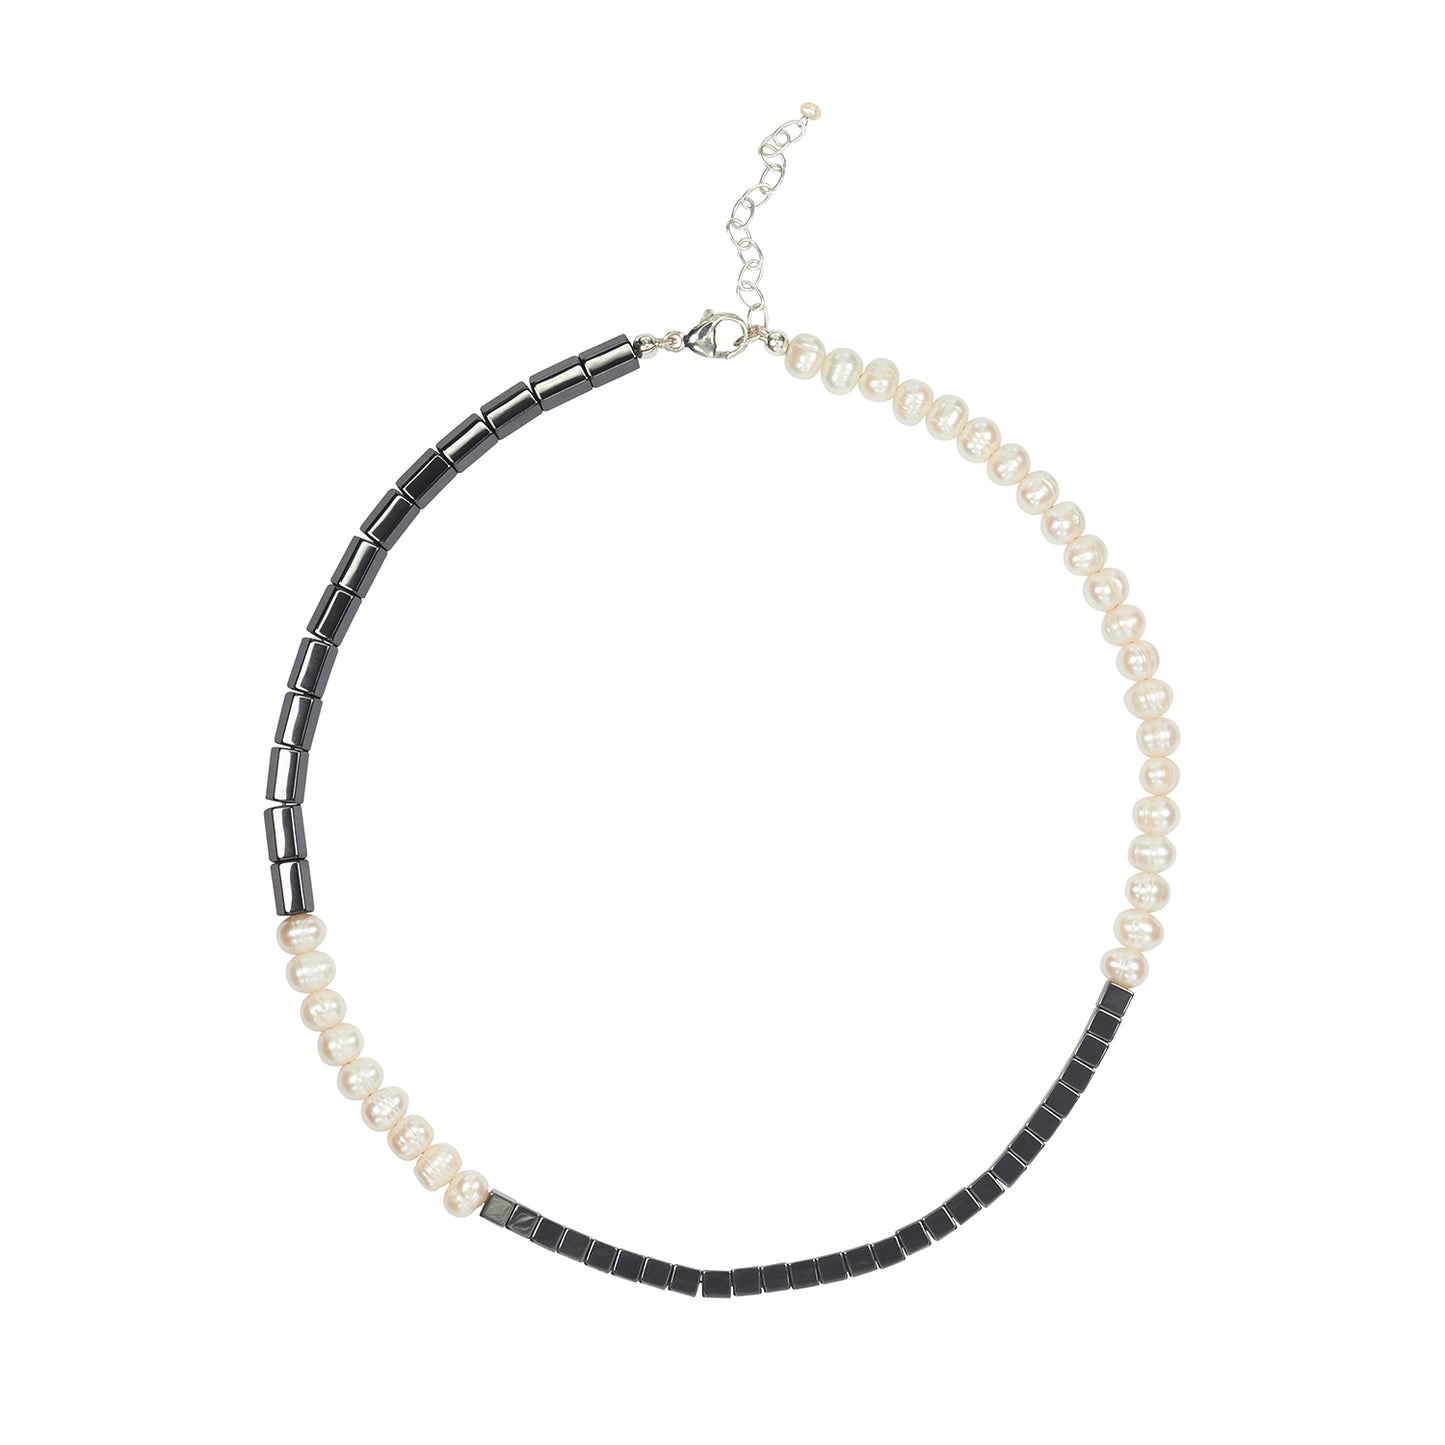 Quadrant Necklace with Freshwater Pearls and Hematine